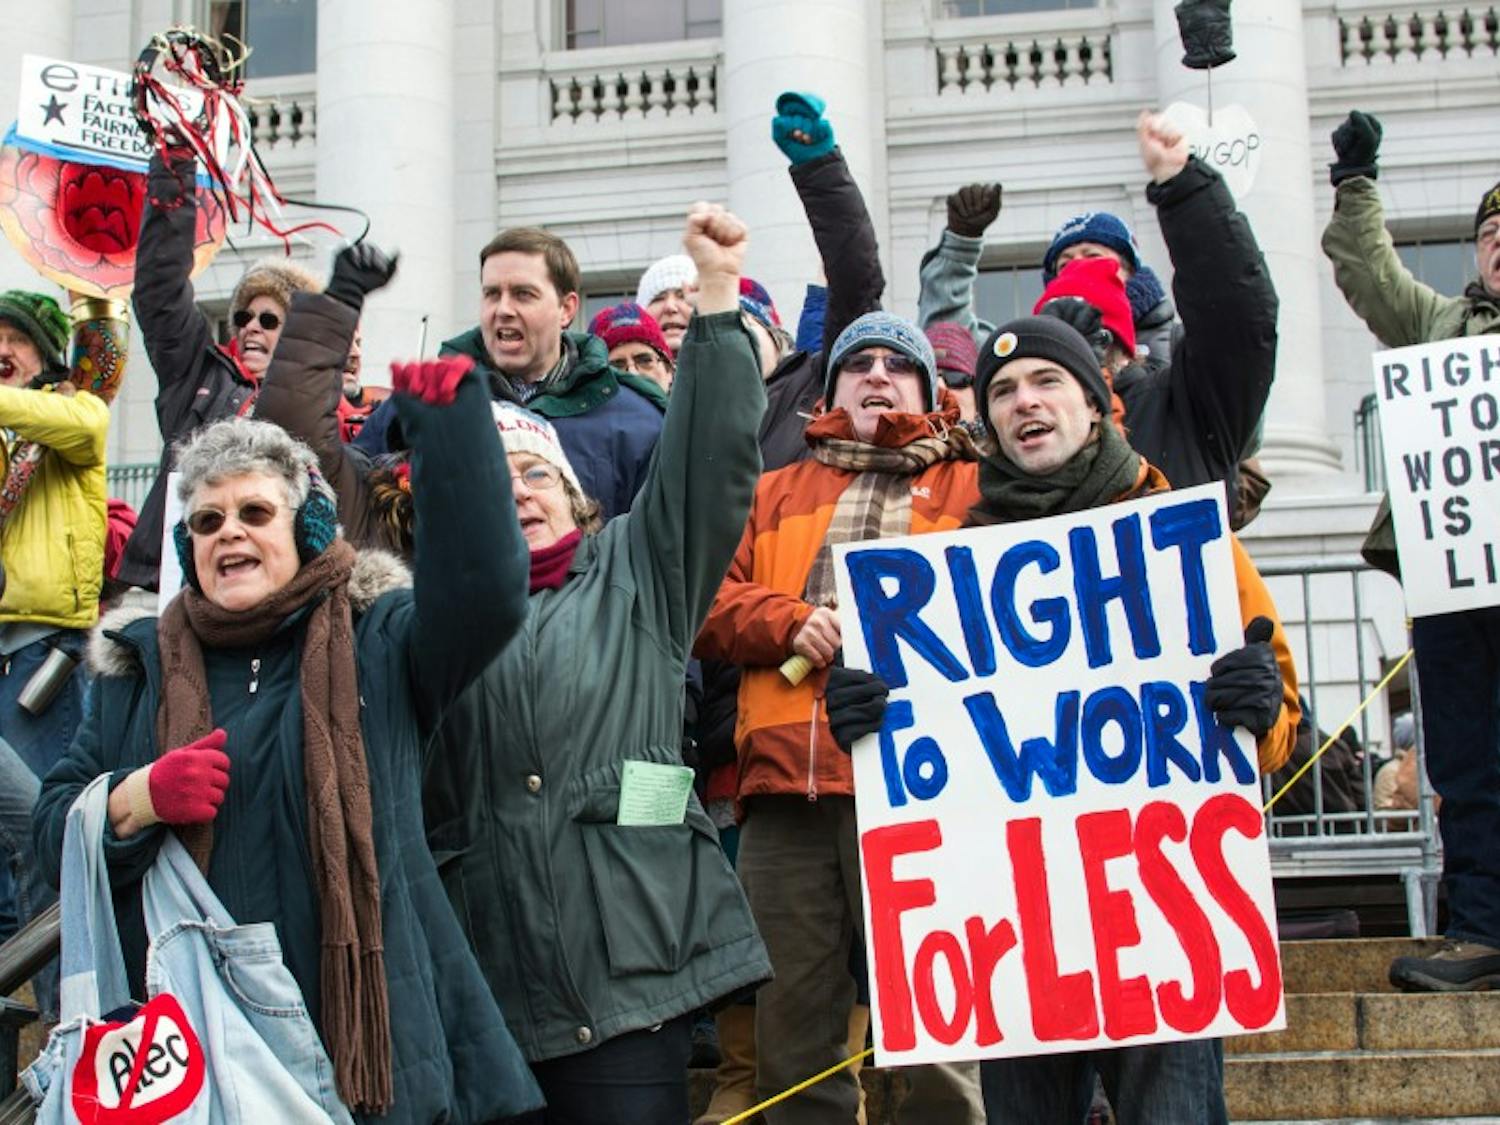 A federal judge upheld Wisconsin’s right-to-work law Monday, which has previously been heavily protested at the state Capitol.&nbsp;